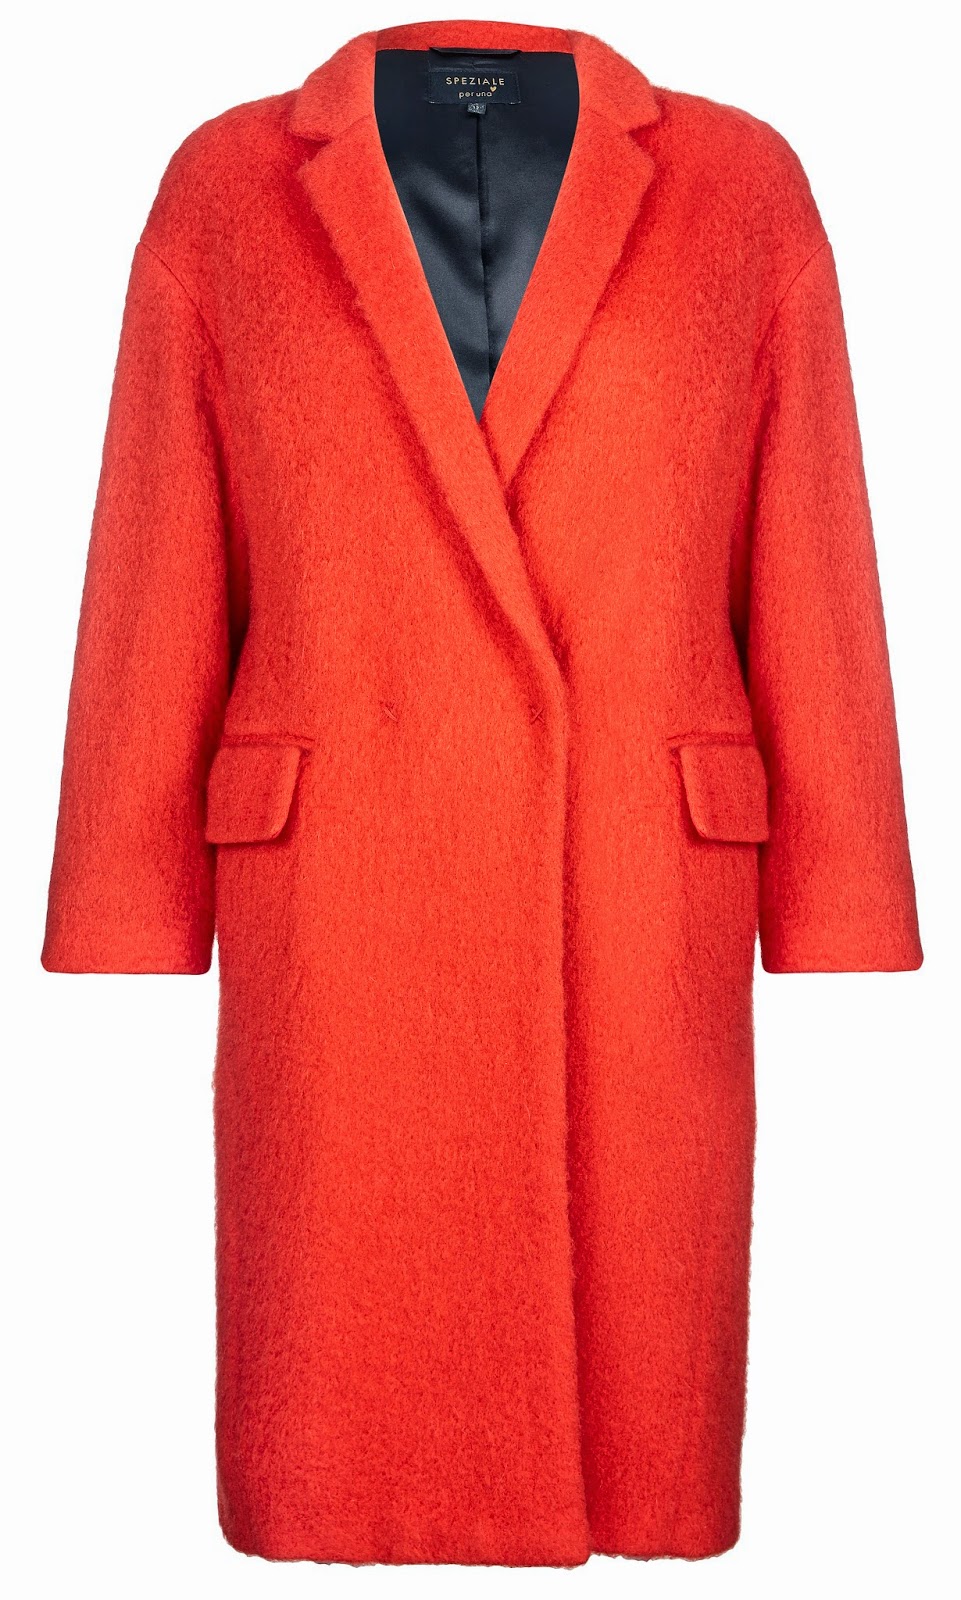 The Bright Red Coat — That’s Not My Age